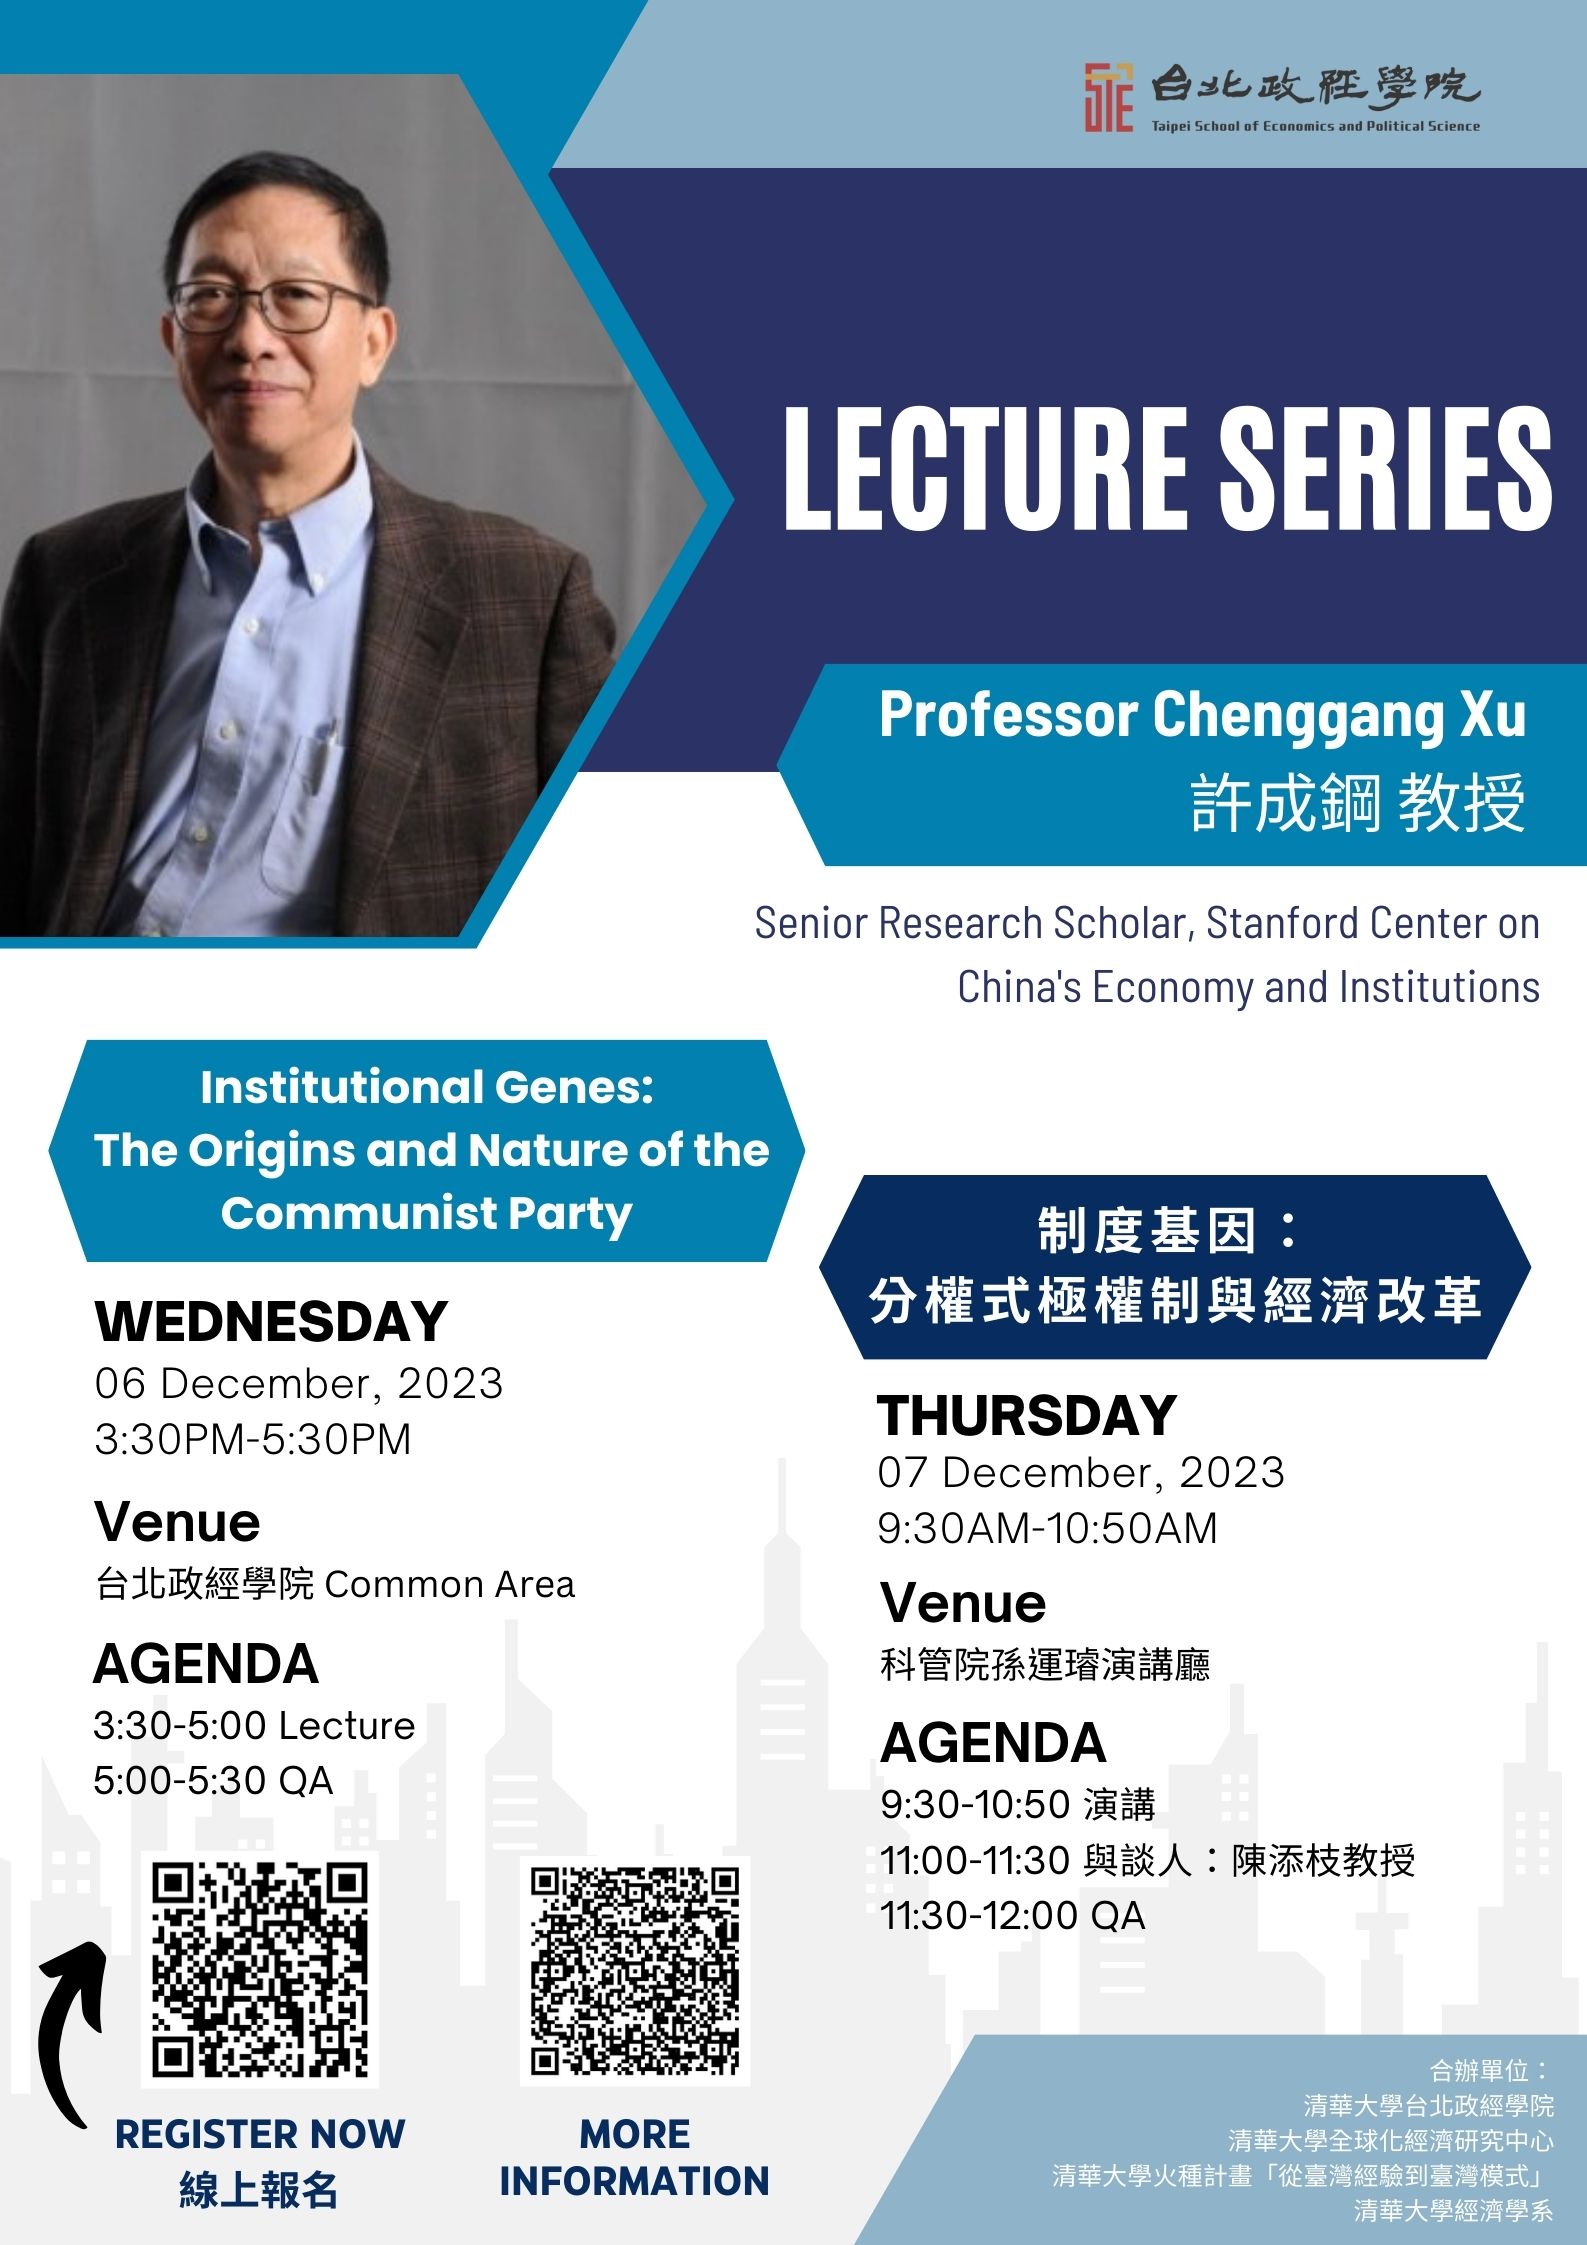 Lectures with Professor Chenggang Xu